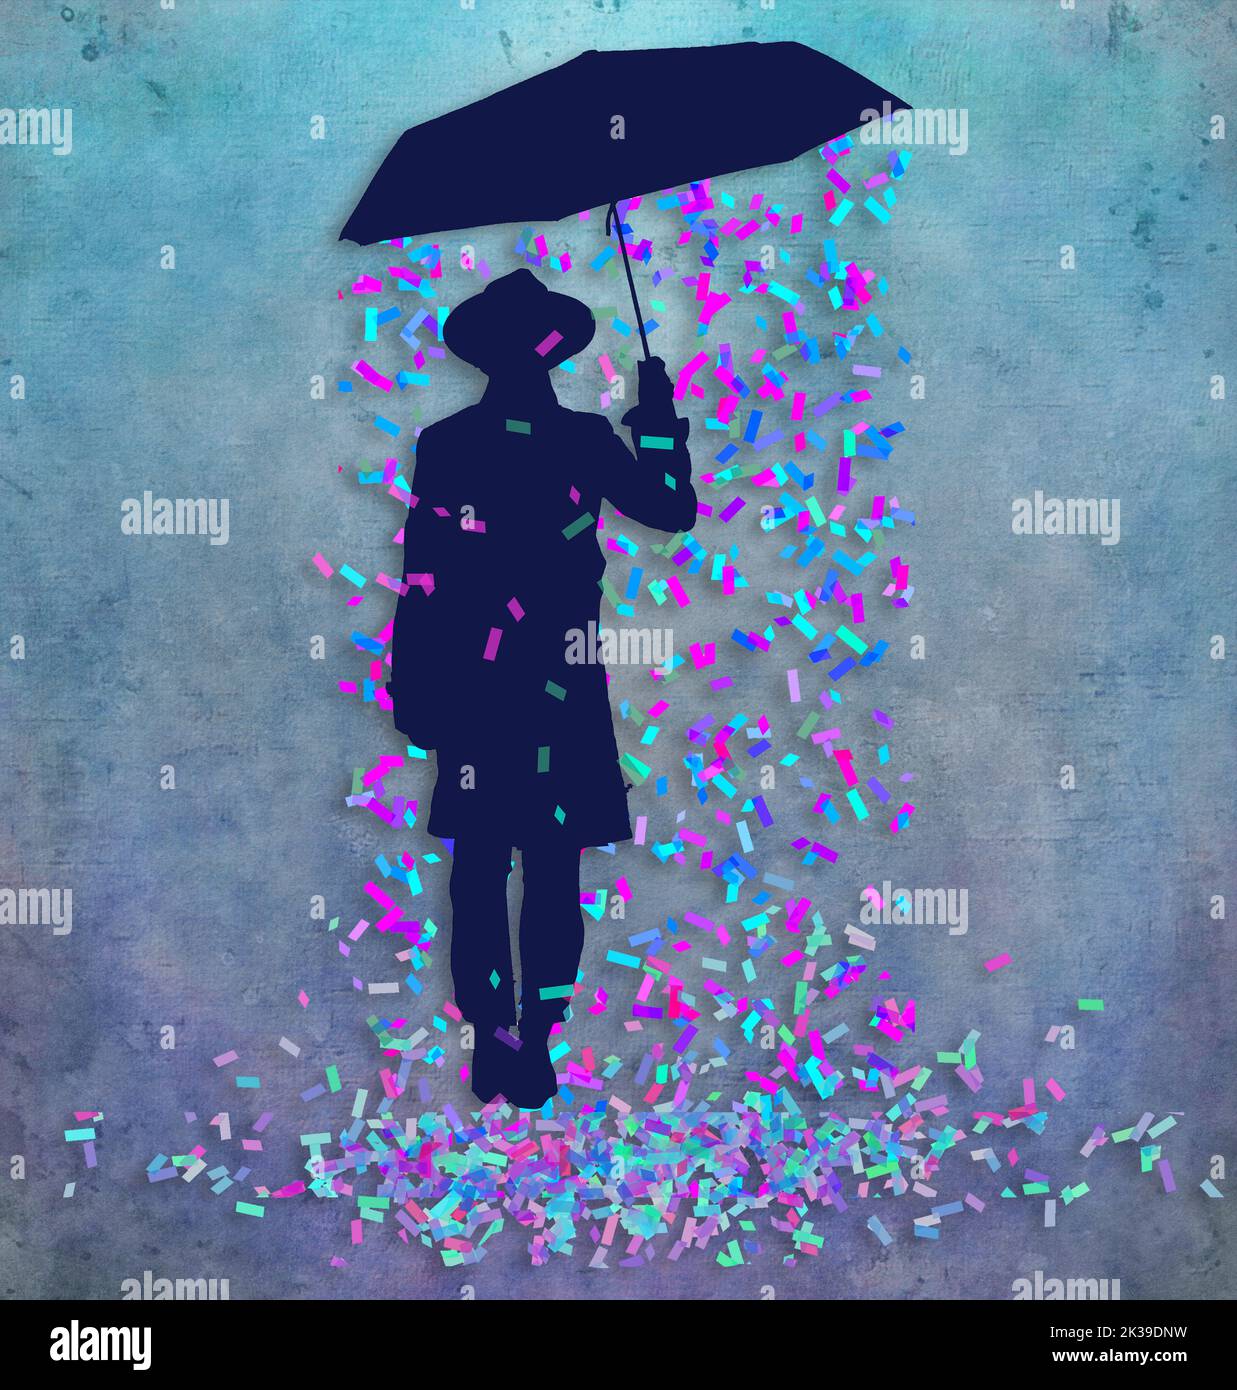 A man with an umbrella has a private celebration and is well pleased with himself as confetti falls under his umbrella in this 3-d illustration Stock Photo